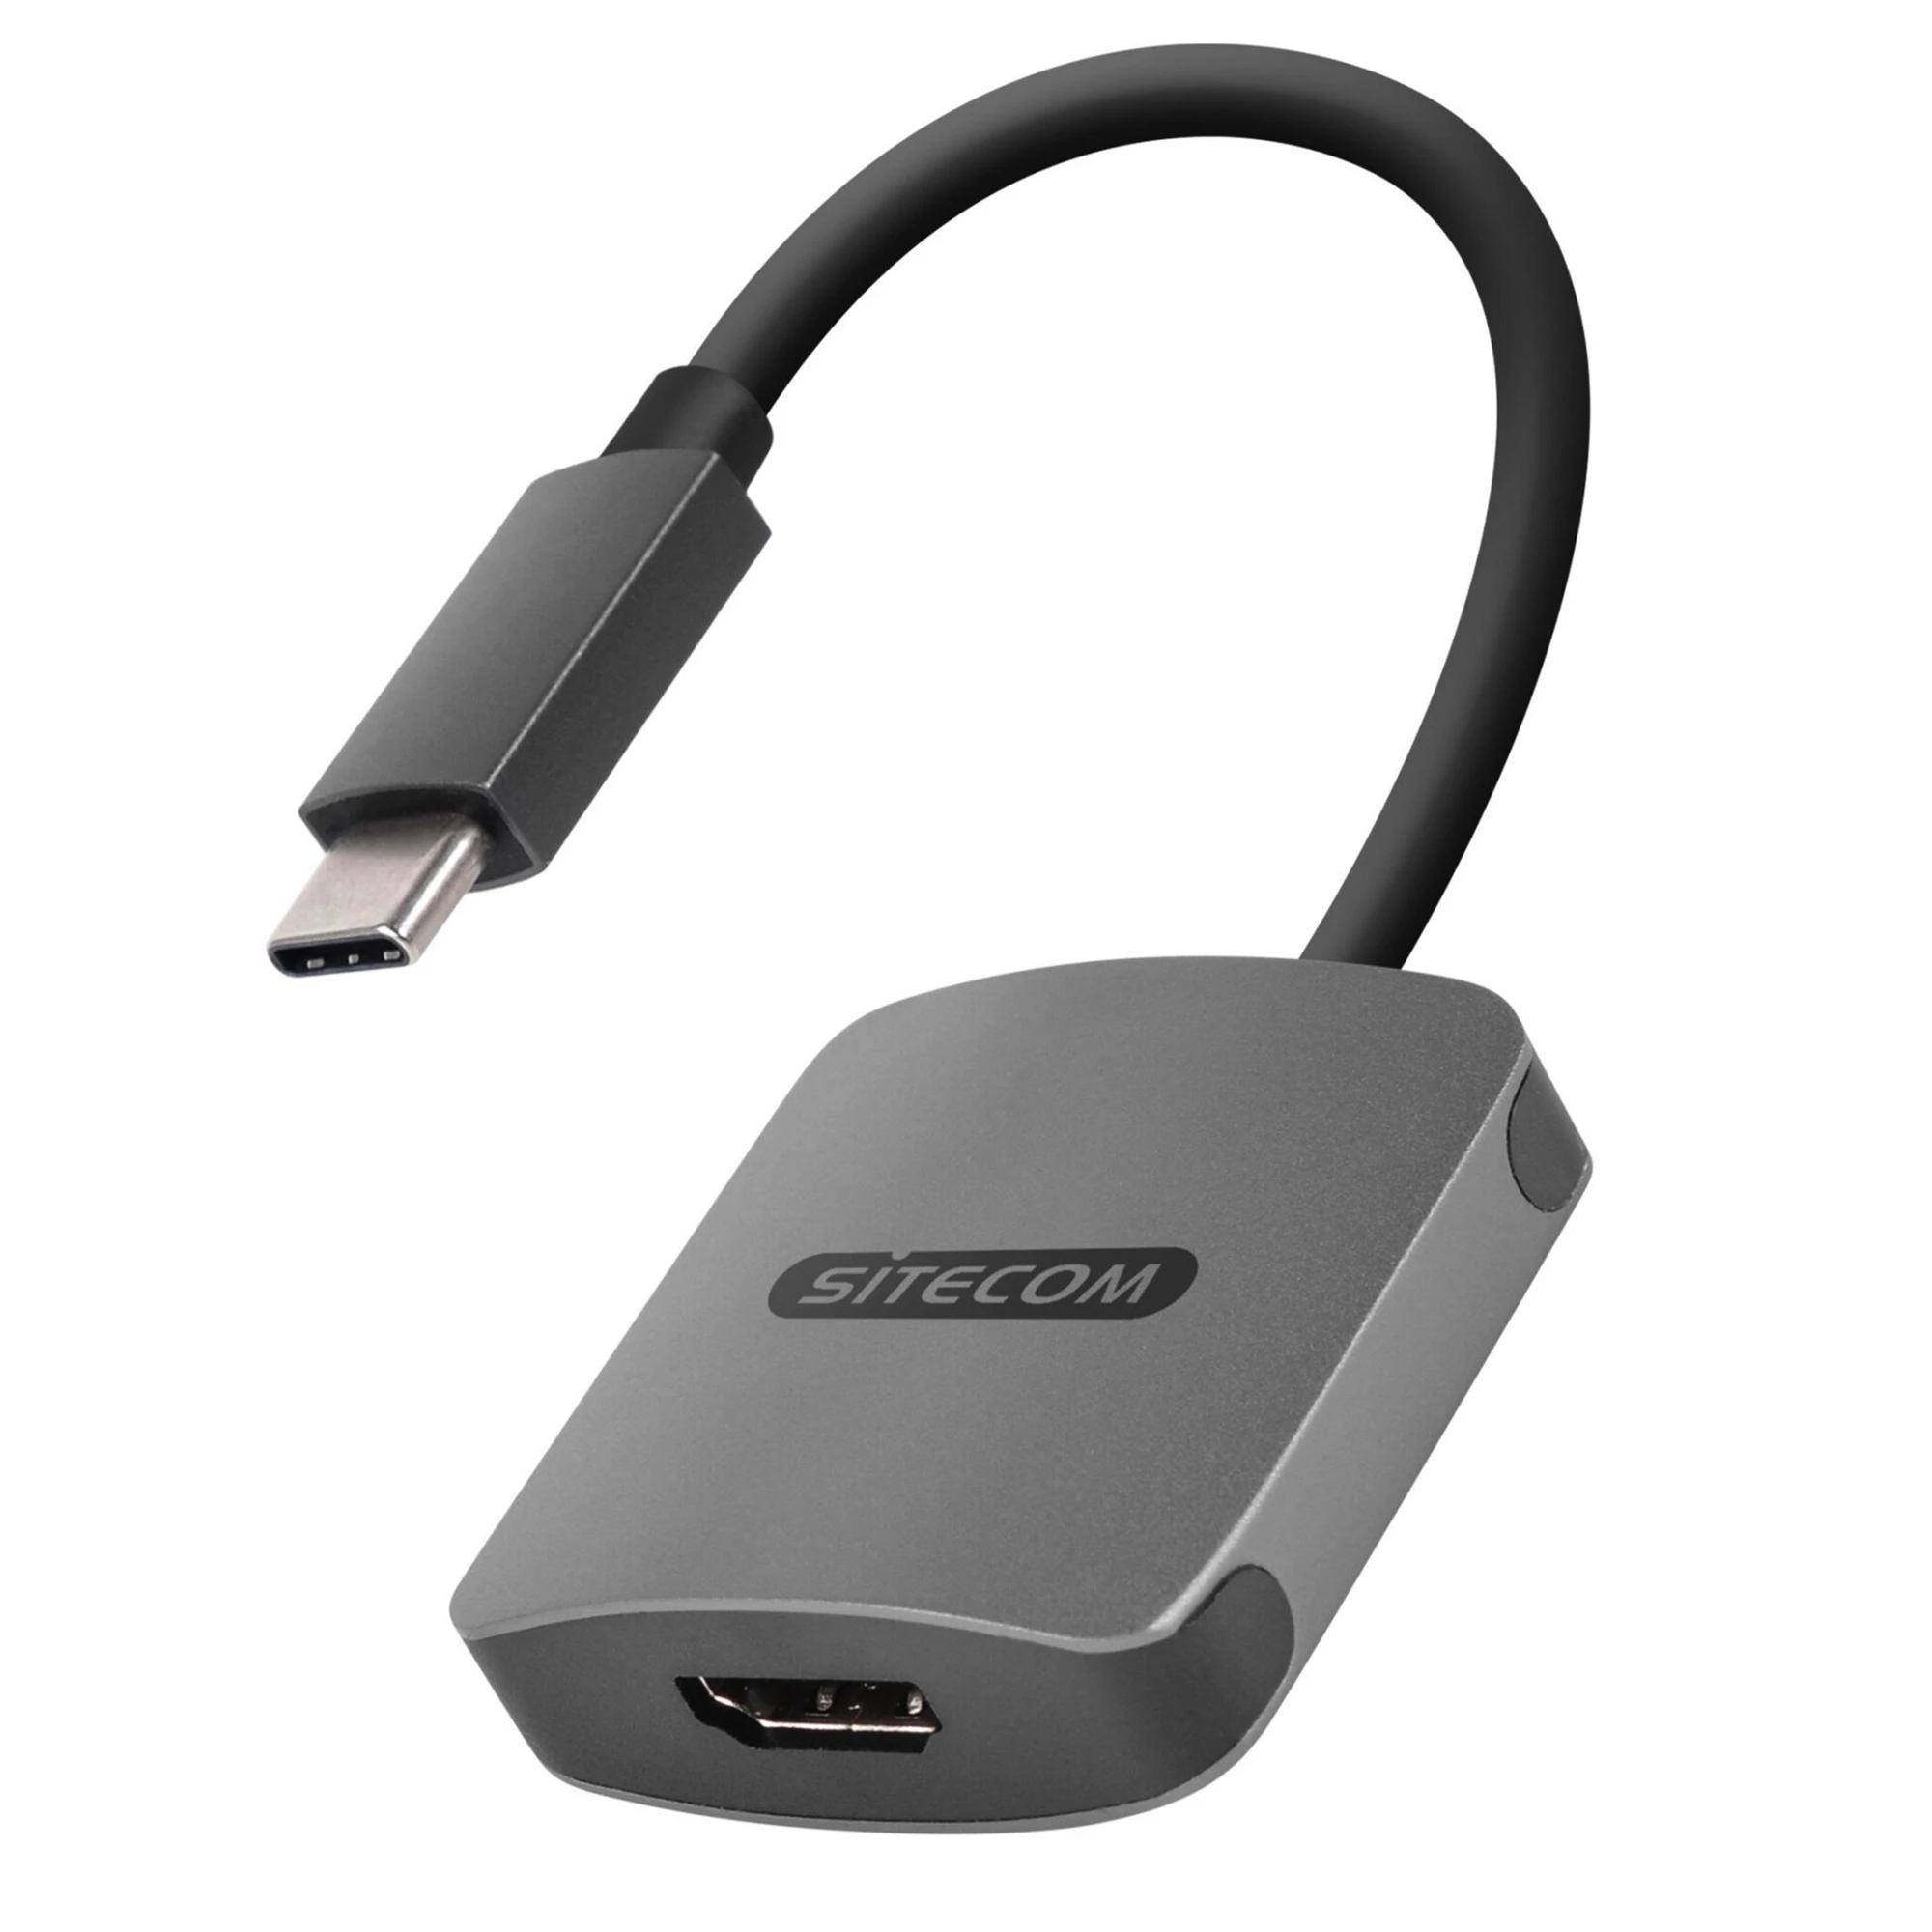 Sitecom USB-C to HDMI Adapter with USB-C Power Delivery (CN-375)